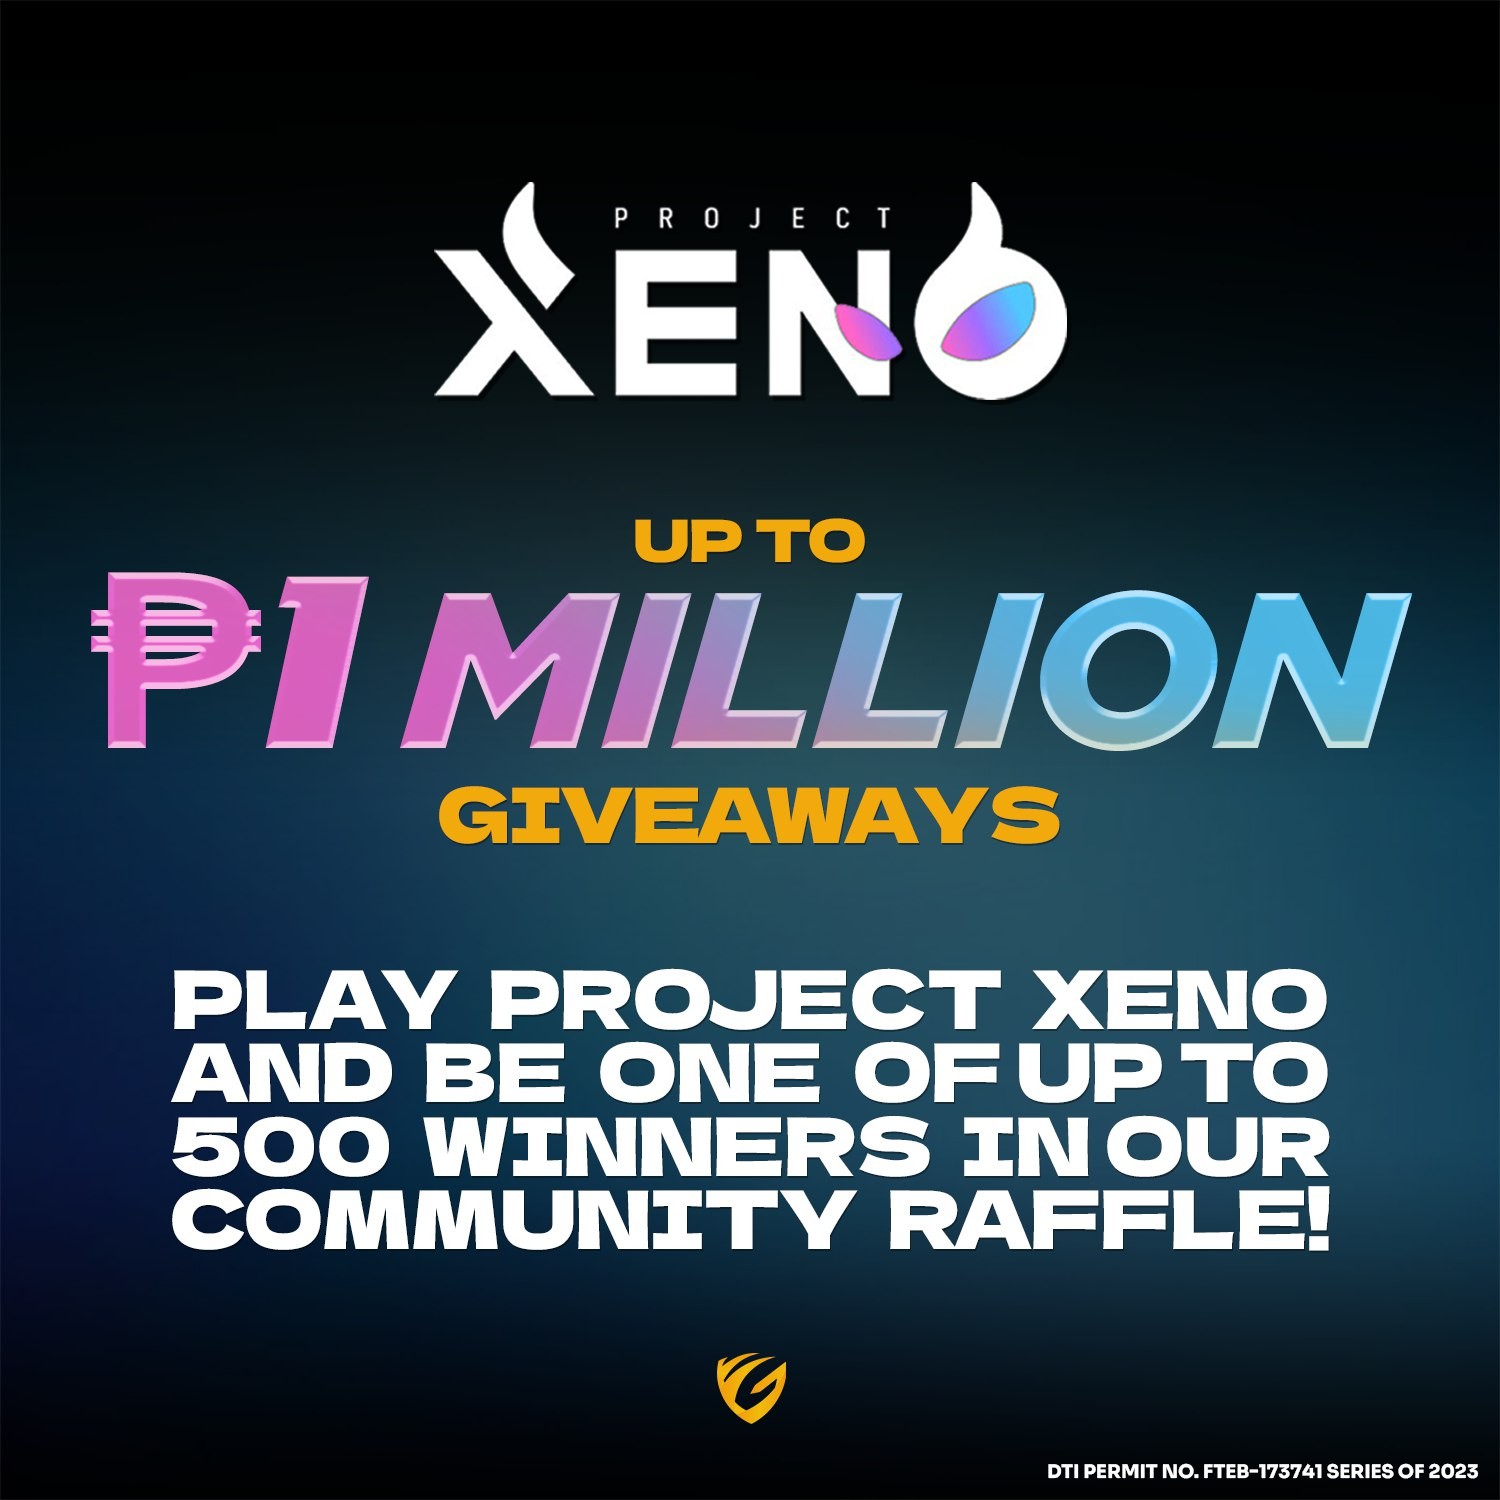 New Web3 game Project Xeno to give away total of P1M to players